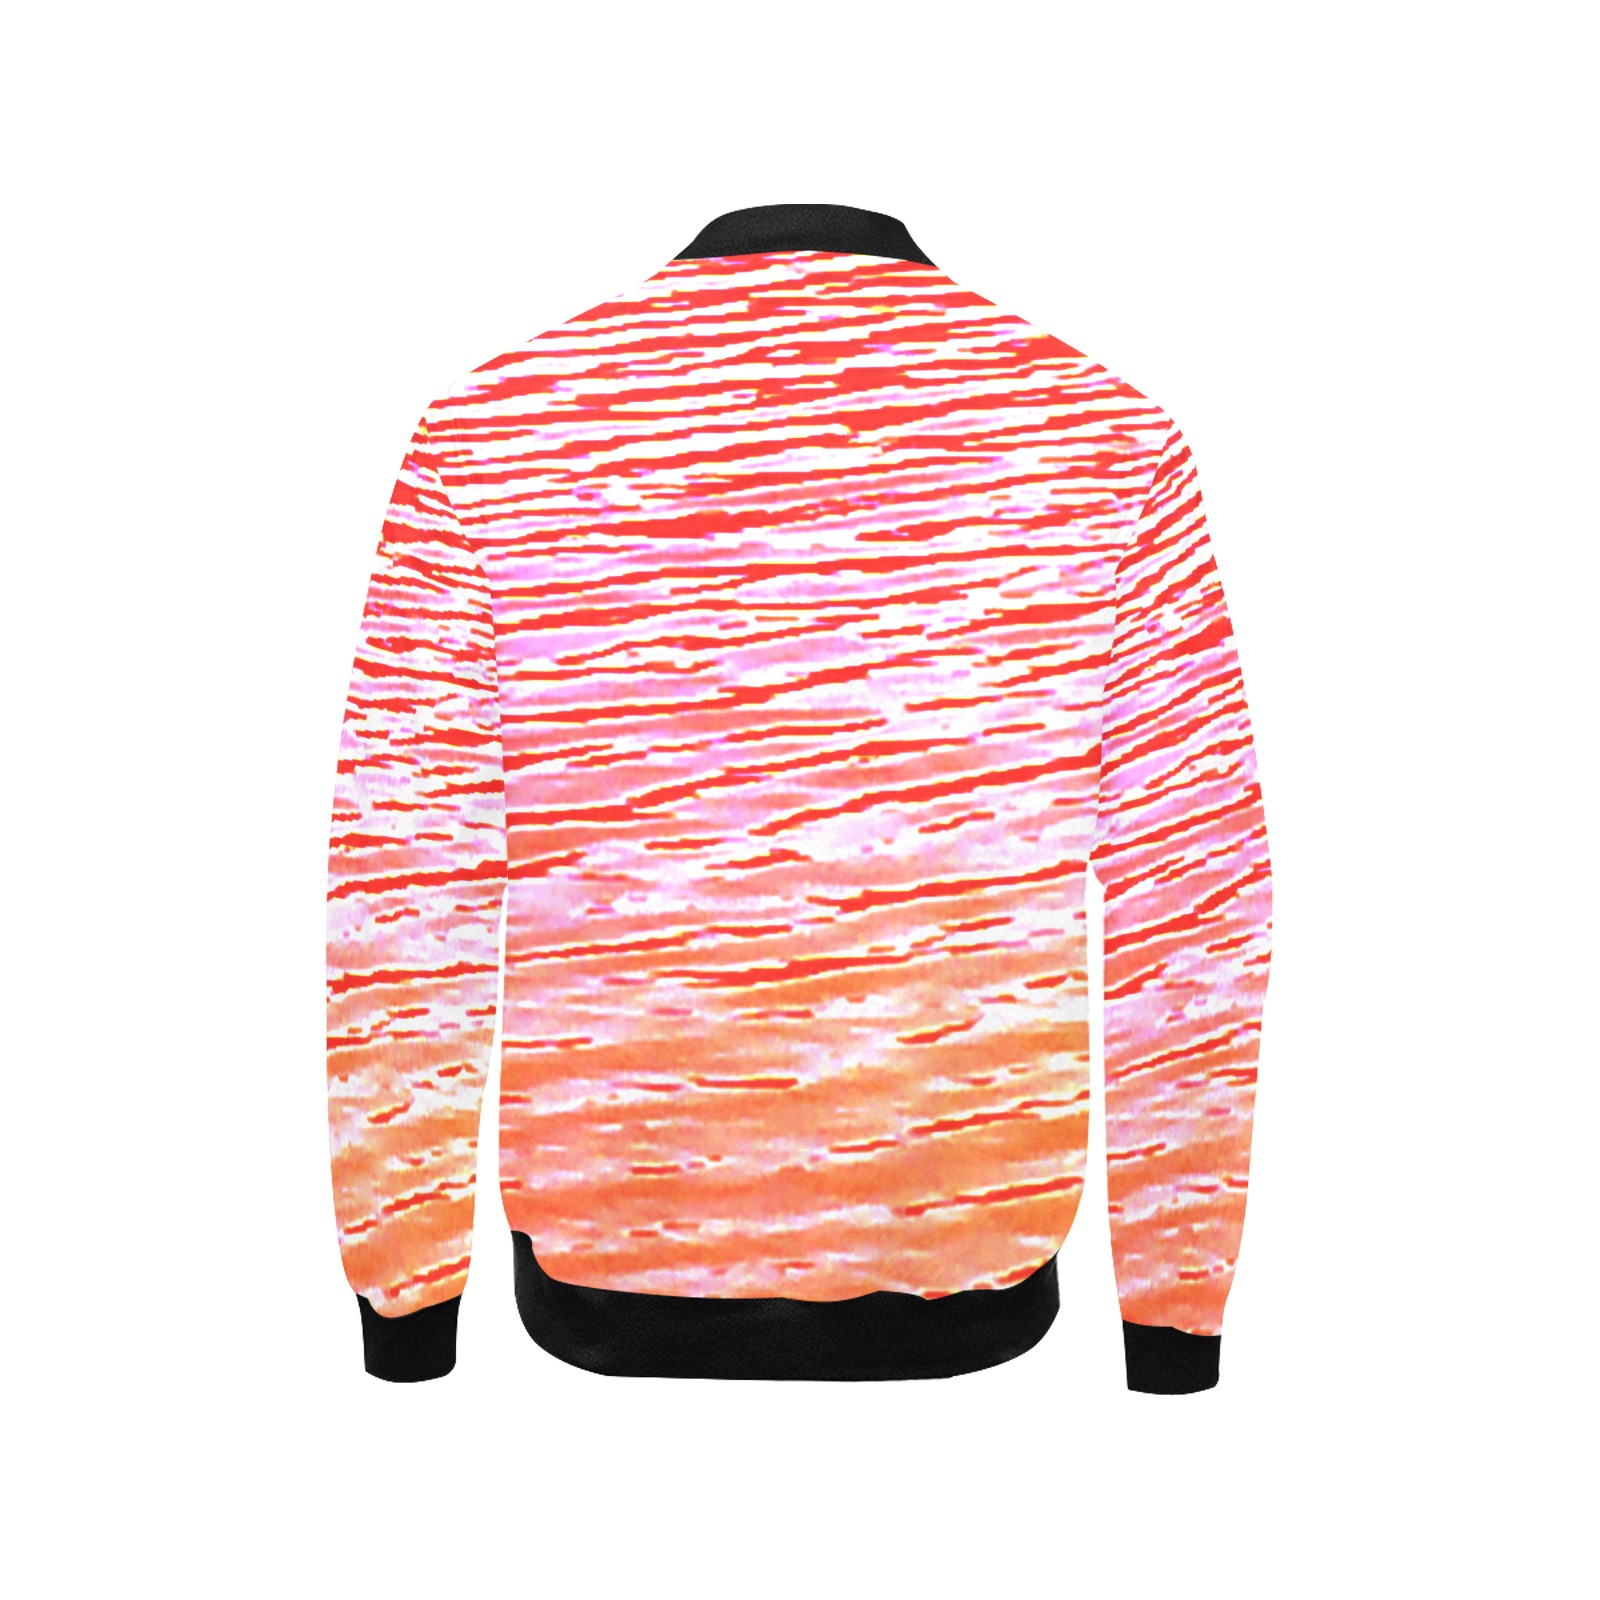 Orange and red water Kids' All Over Print Bomber Jacket (Model H40)